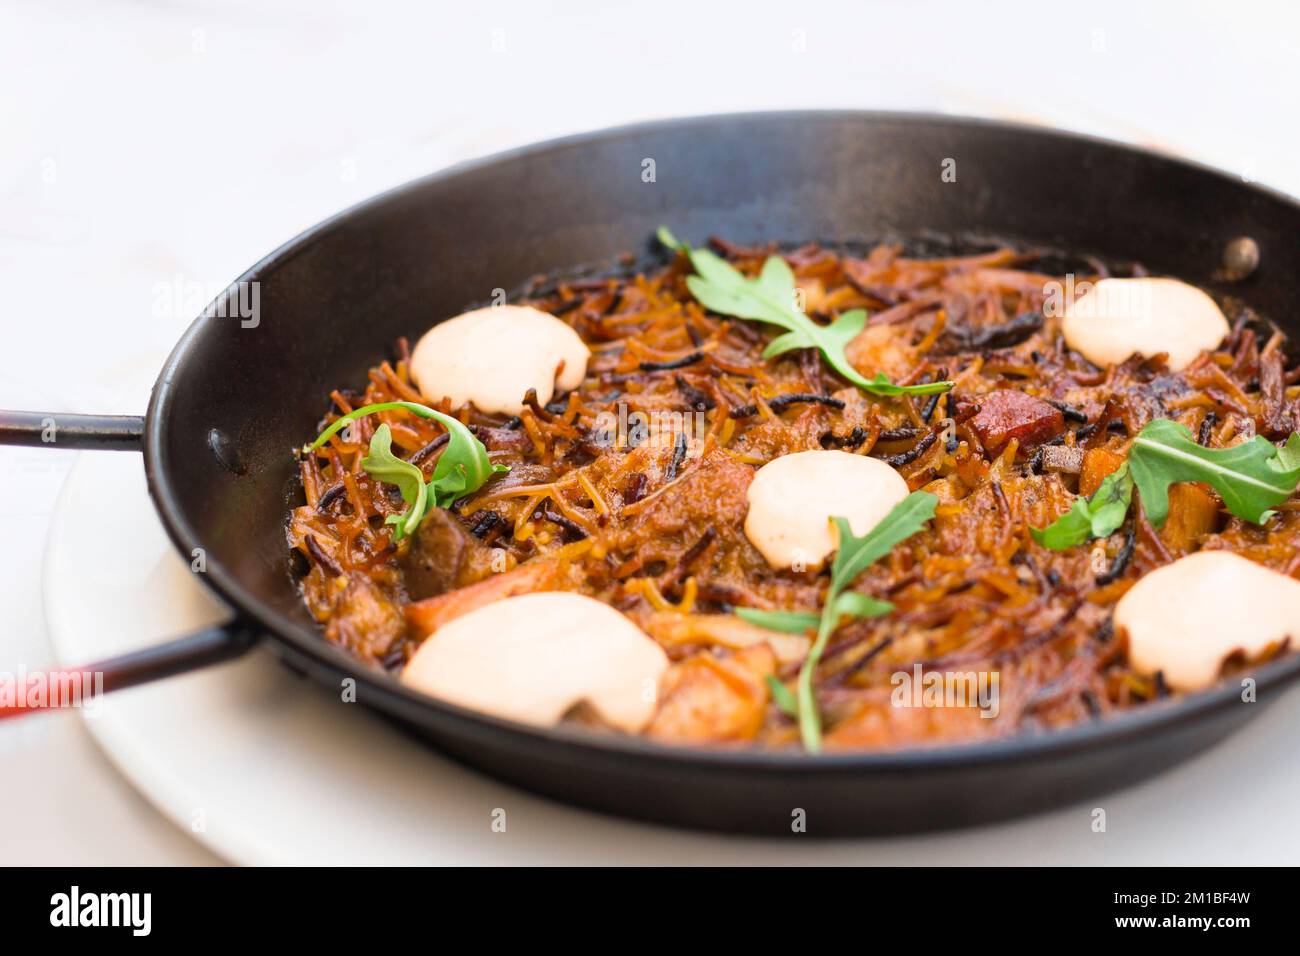 Catalan Fideua, A Traditional Seafood Dish From North East Spain Similar To  Paella . Stock Photo, Picture and Royalty Free Image. Image 67751553.